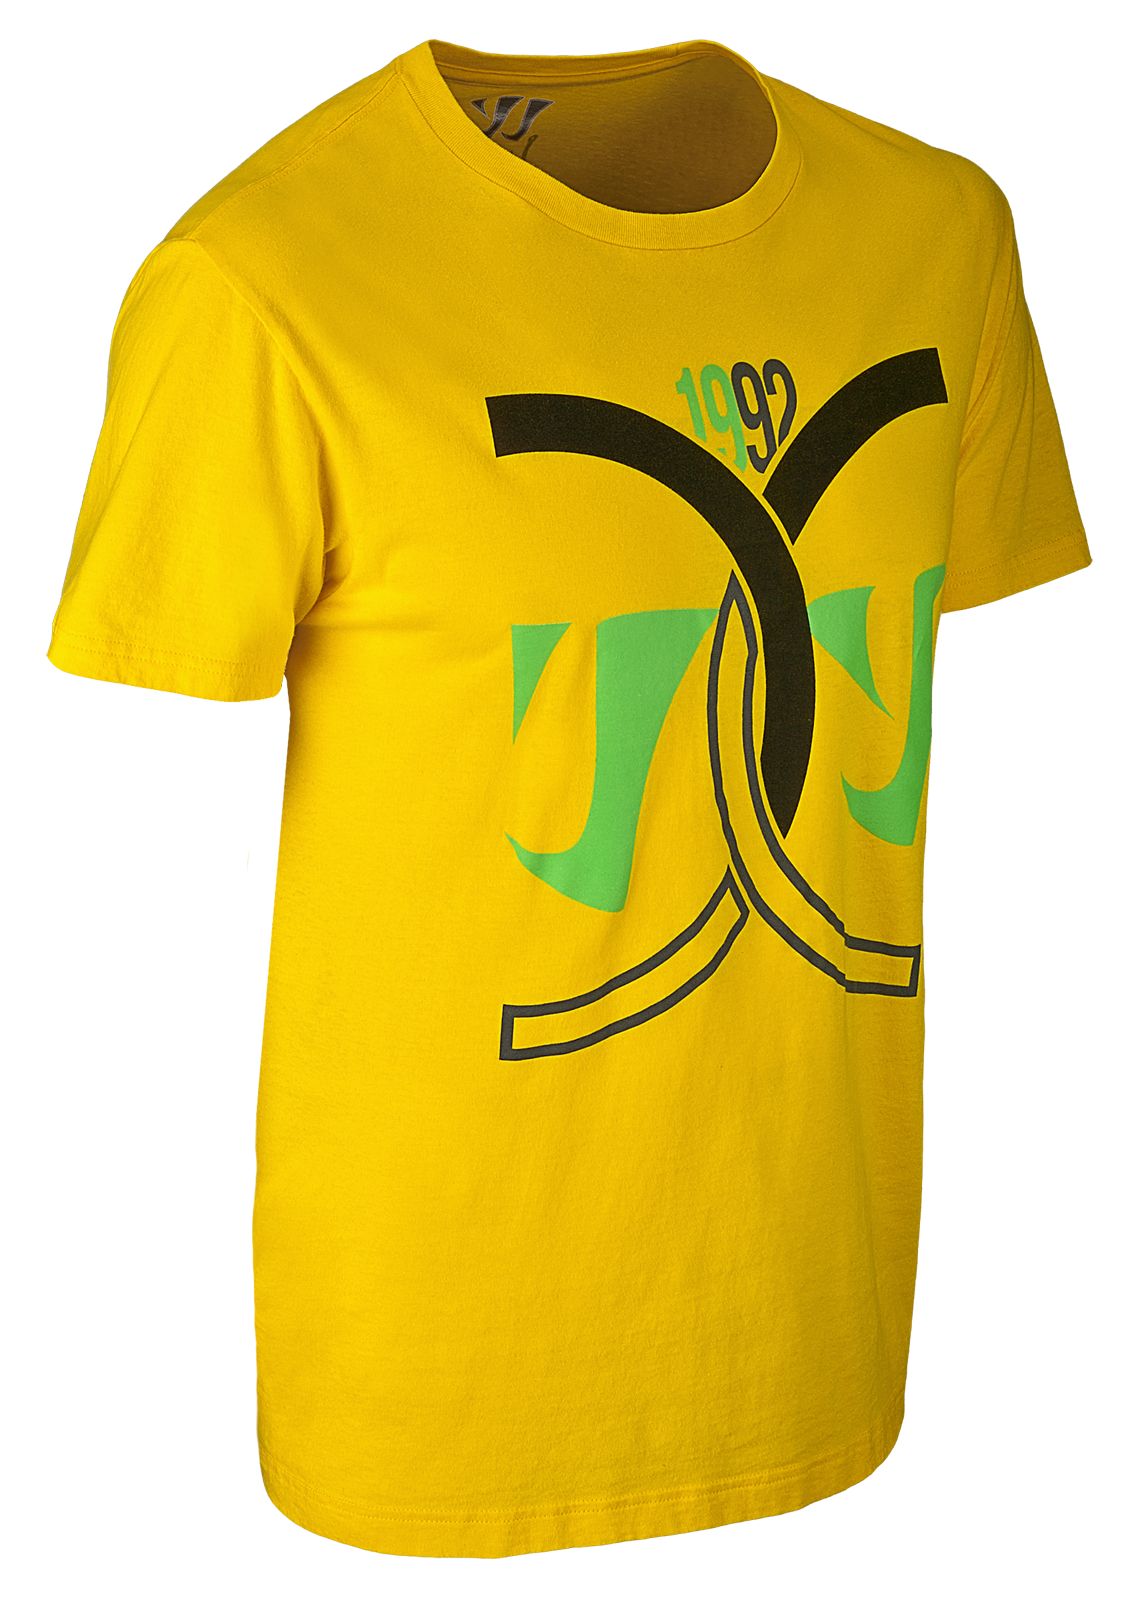 Hook Up Tee, Yellow image number 2